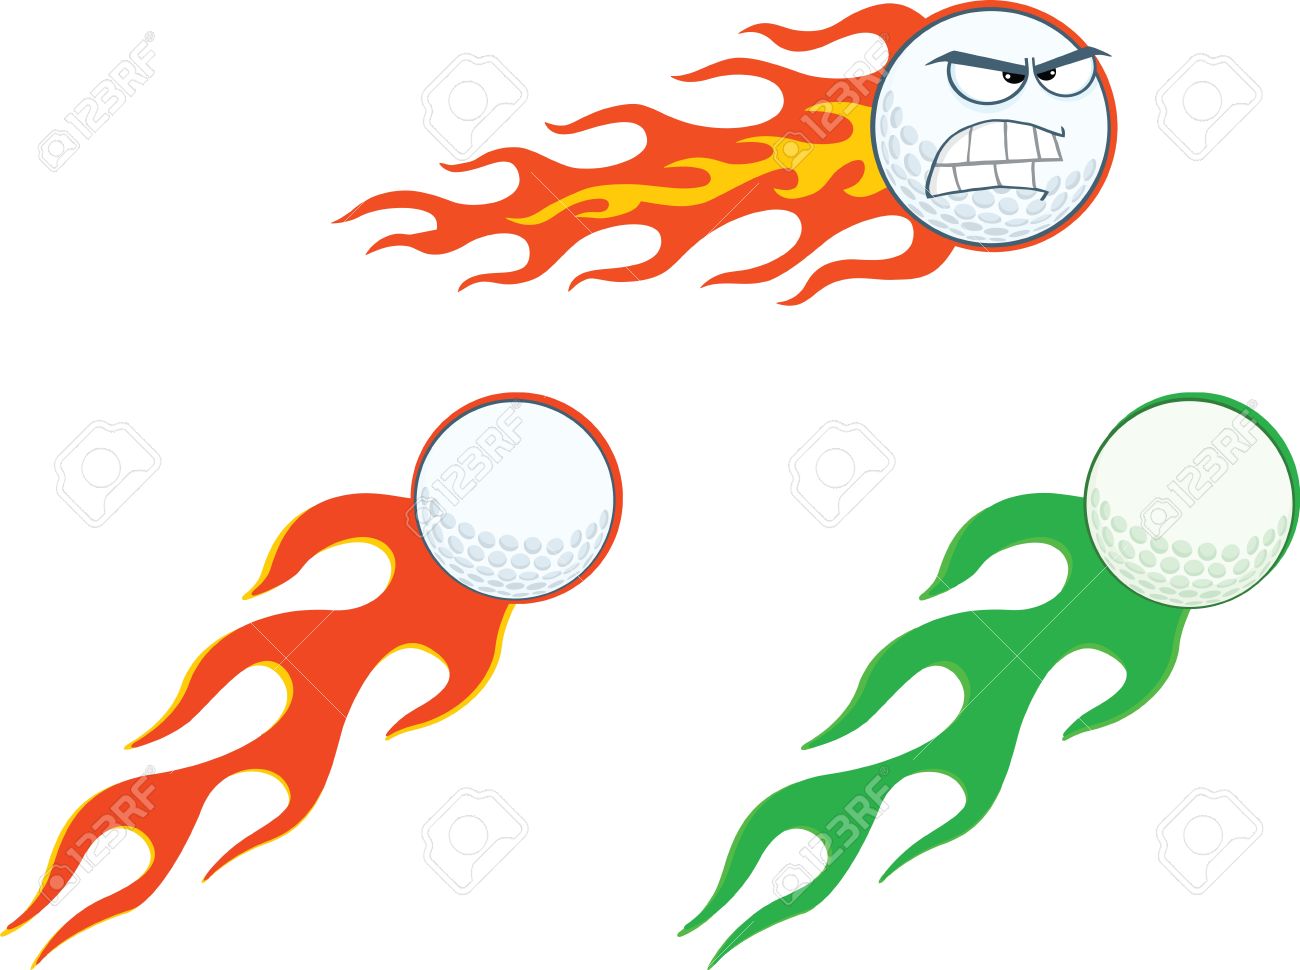 Flaming Golf Ball Collection Royalty Free Cliparts, Vectors, And.